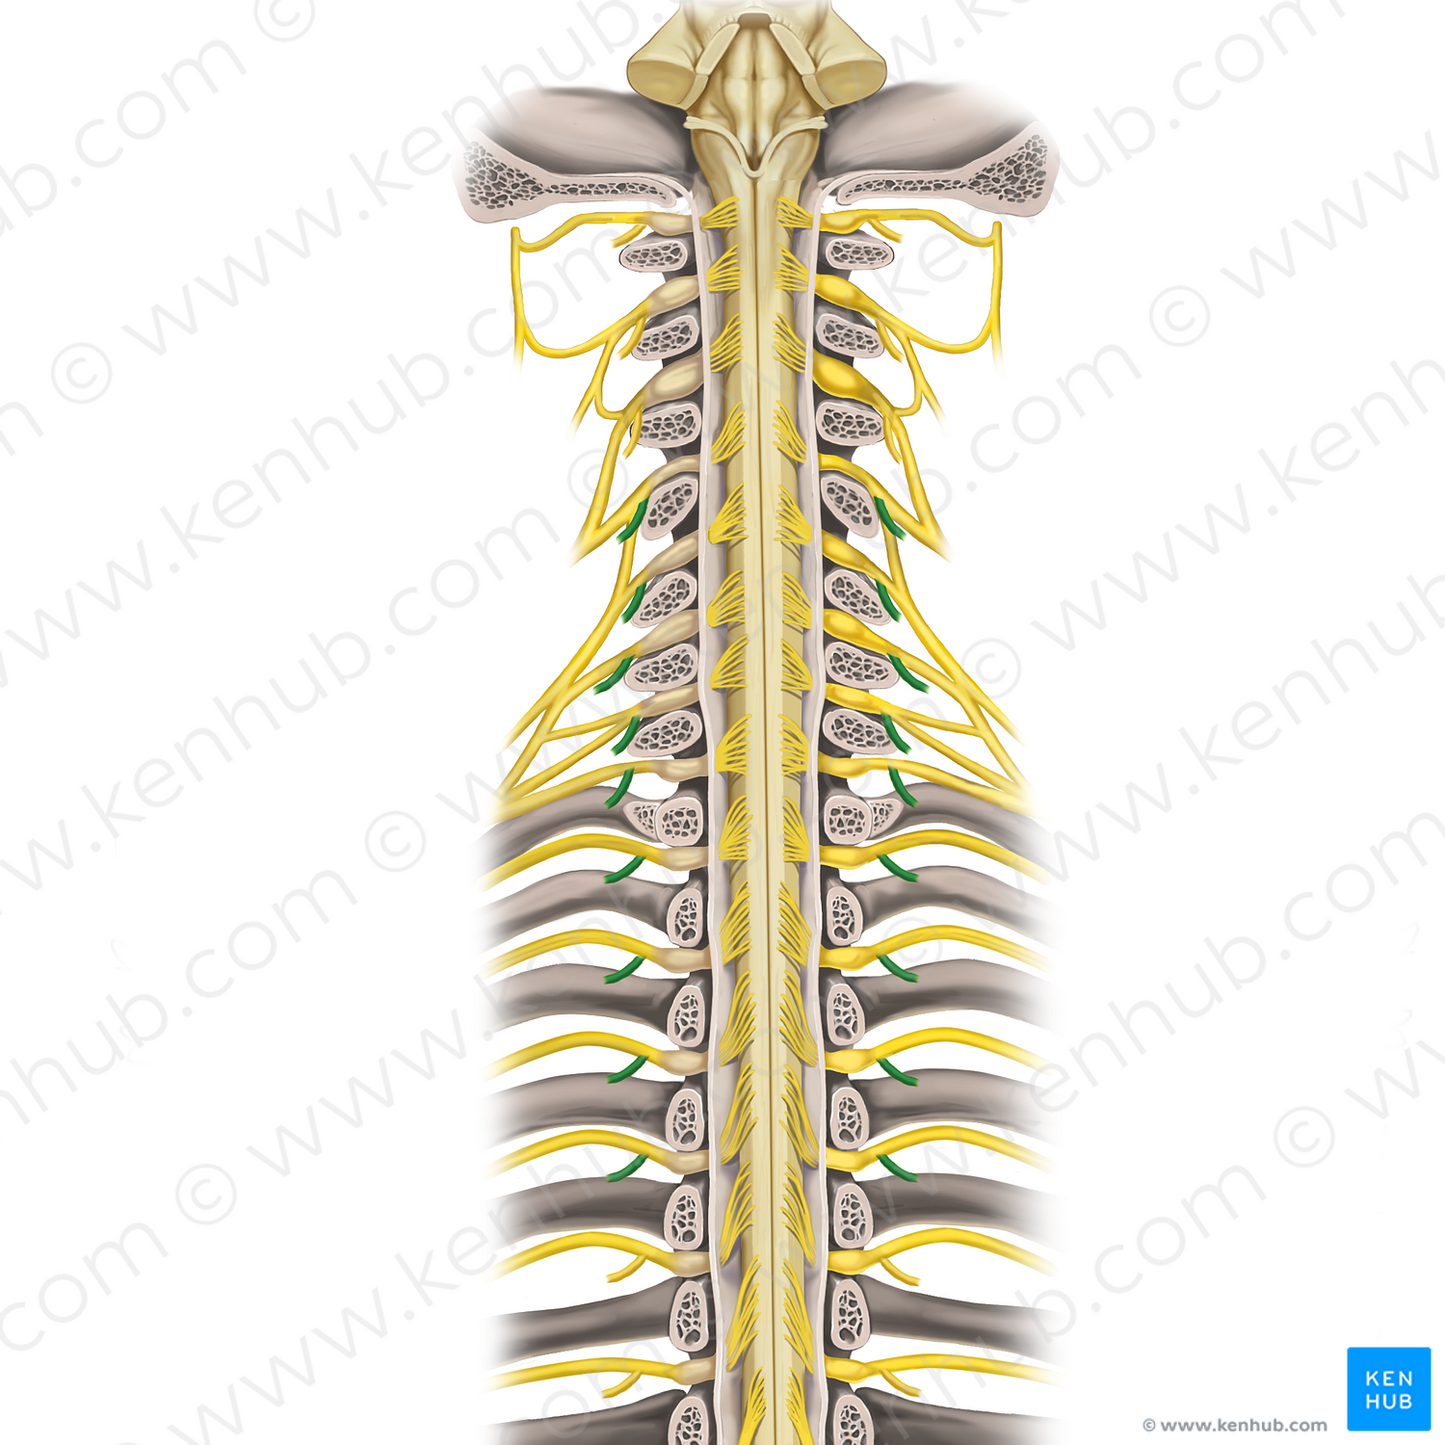 Posterior rami of spinal nerves C4-T4 (#16185)